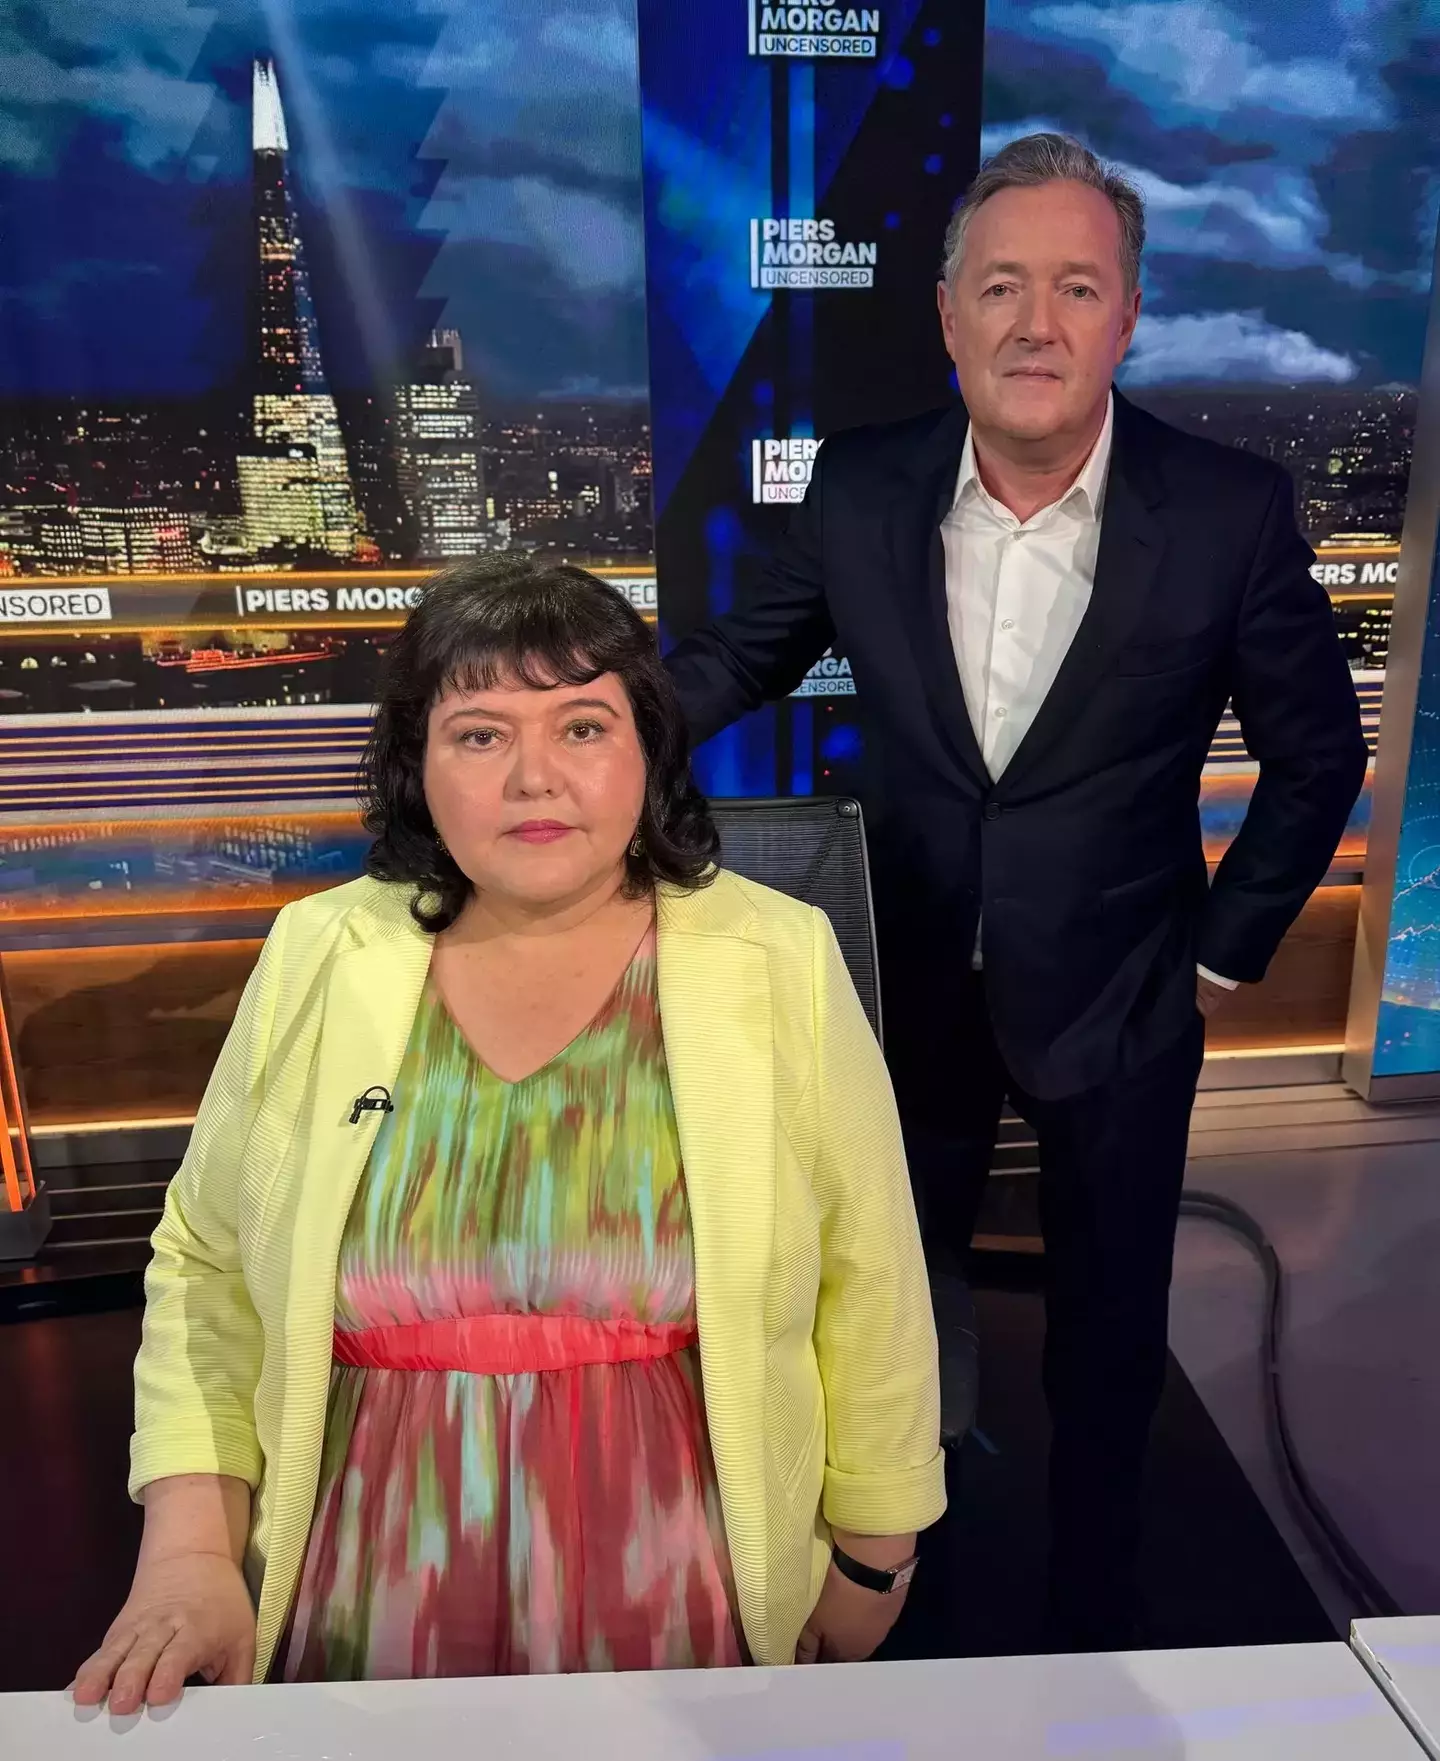 Fiona Harvey was grilled by Piers Morgan, she says. (Talk TV)